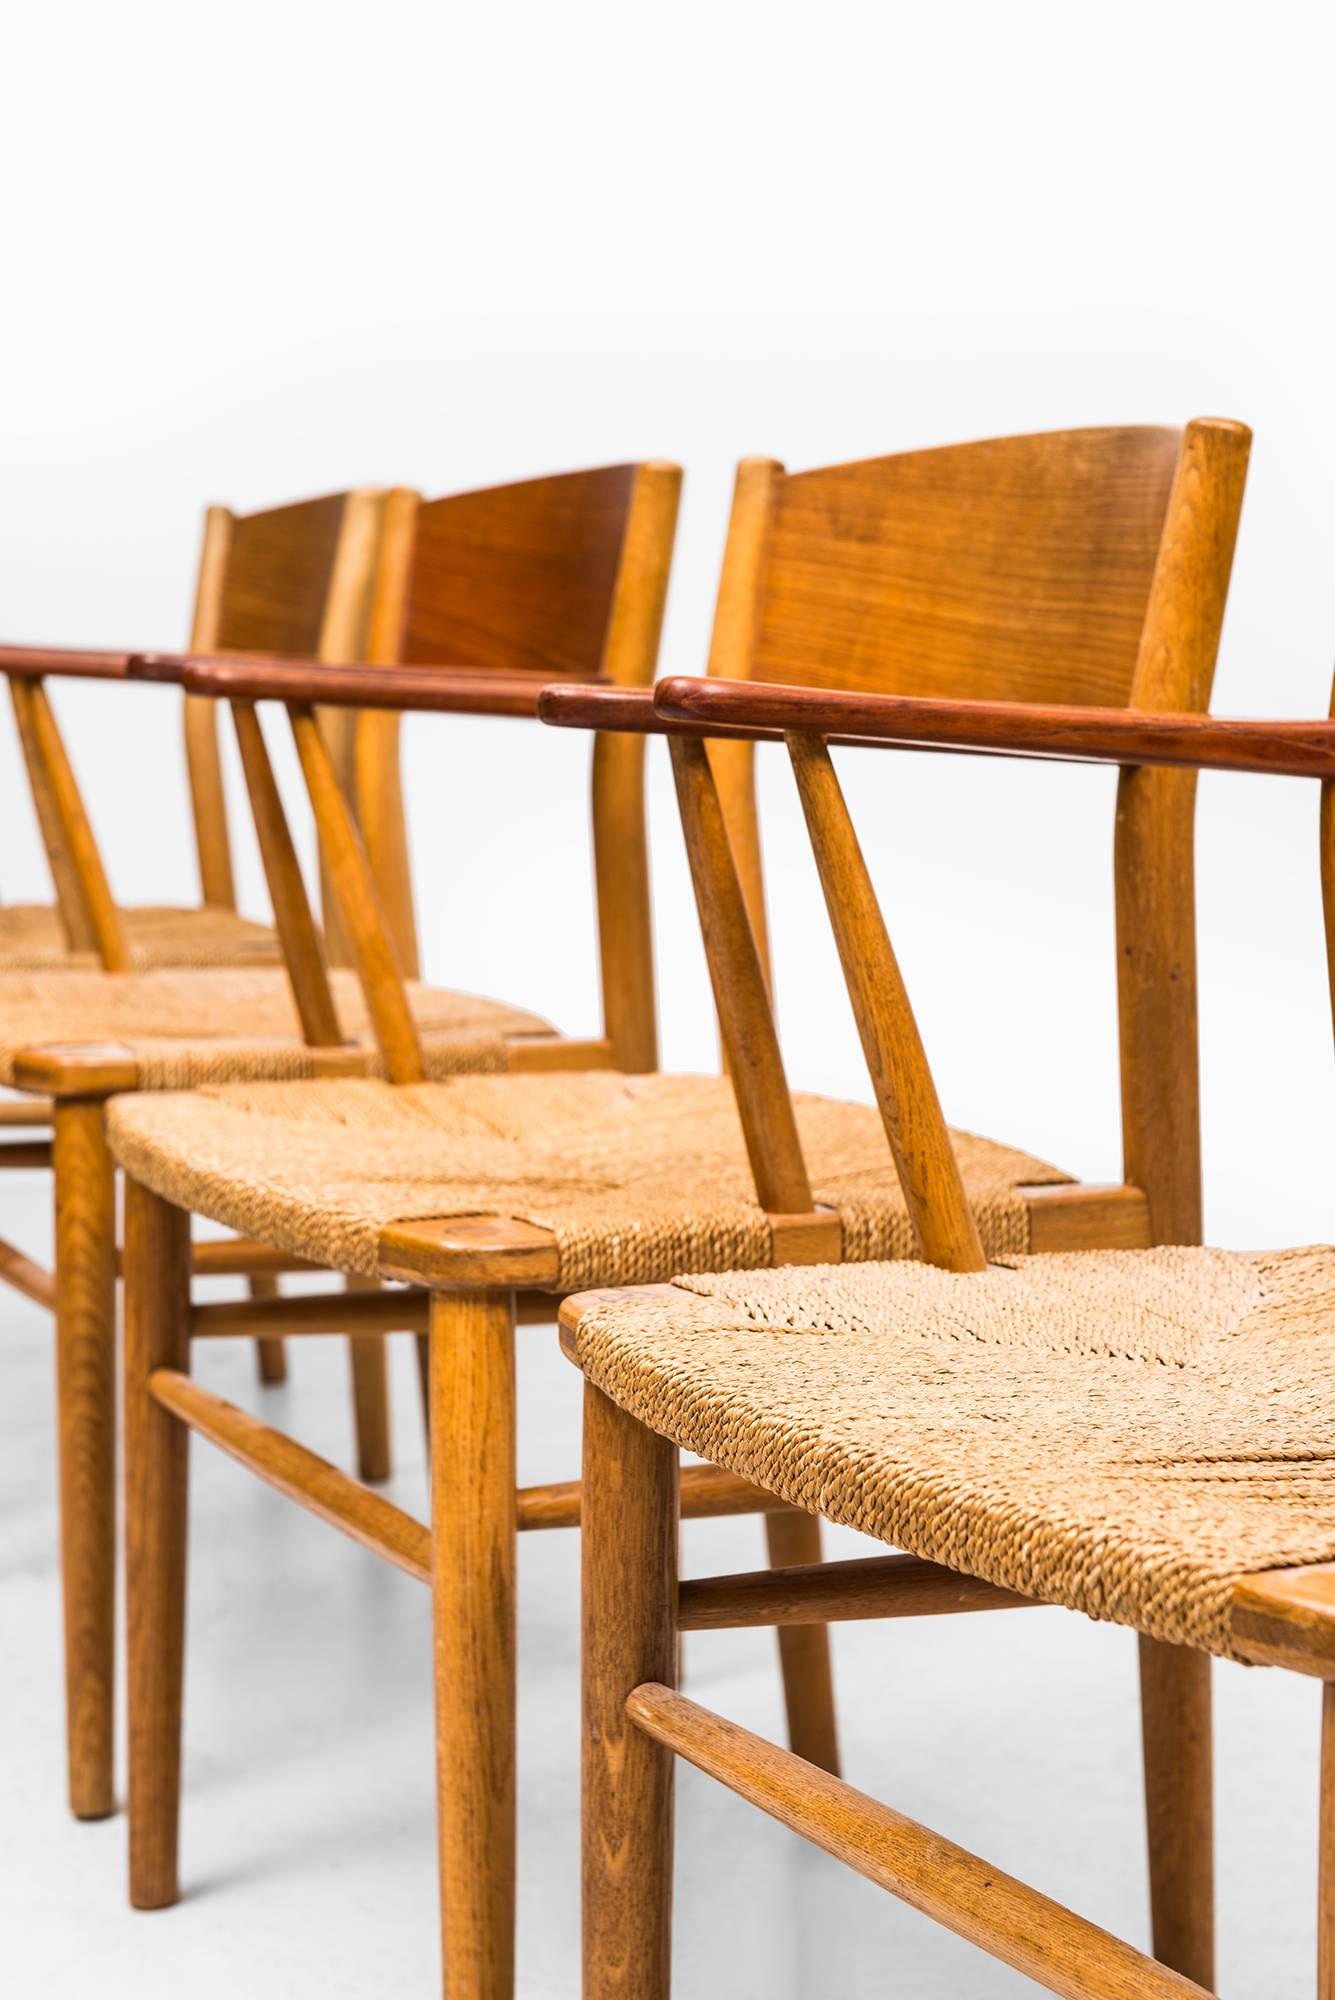 Rare set of four armchairs and two dining chairs designed by Børge Mogensen. Produced by Søborg Møbelfabrik in Denmark.